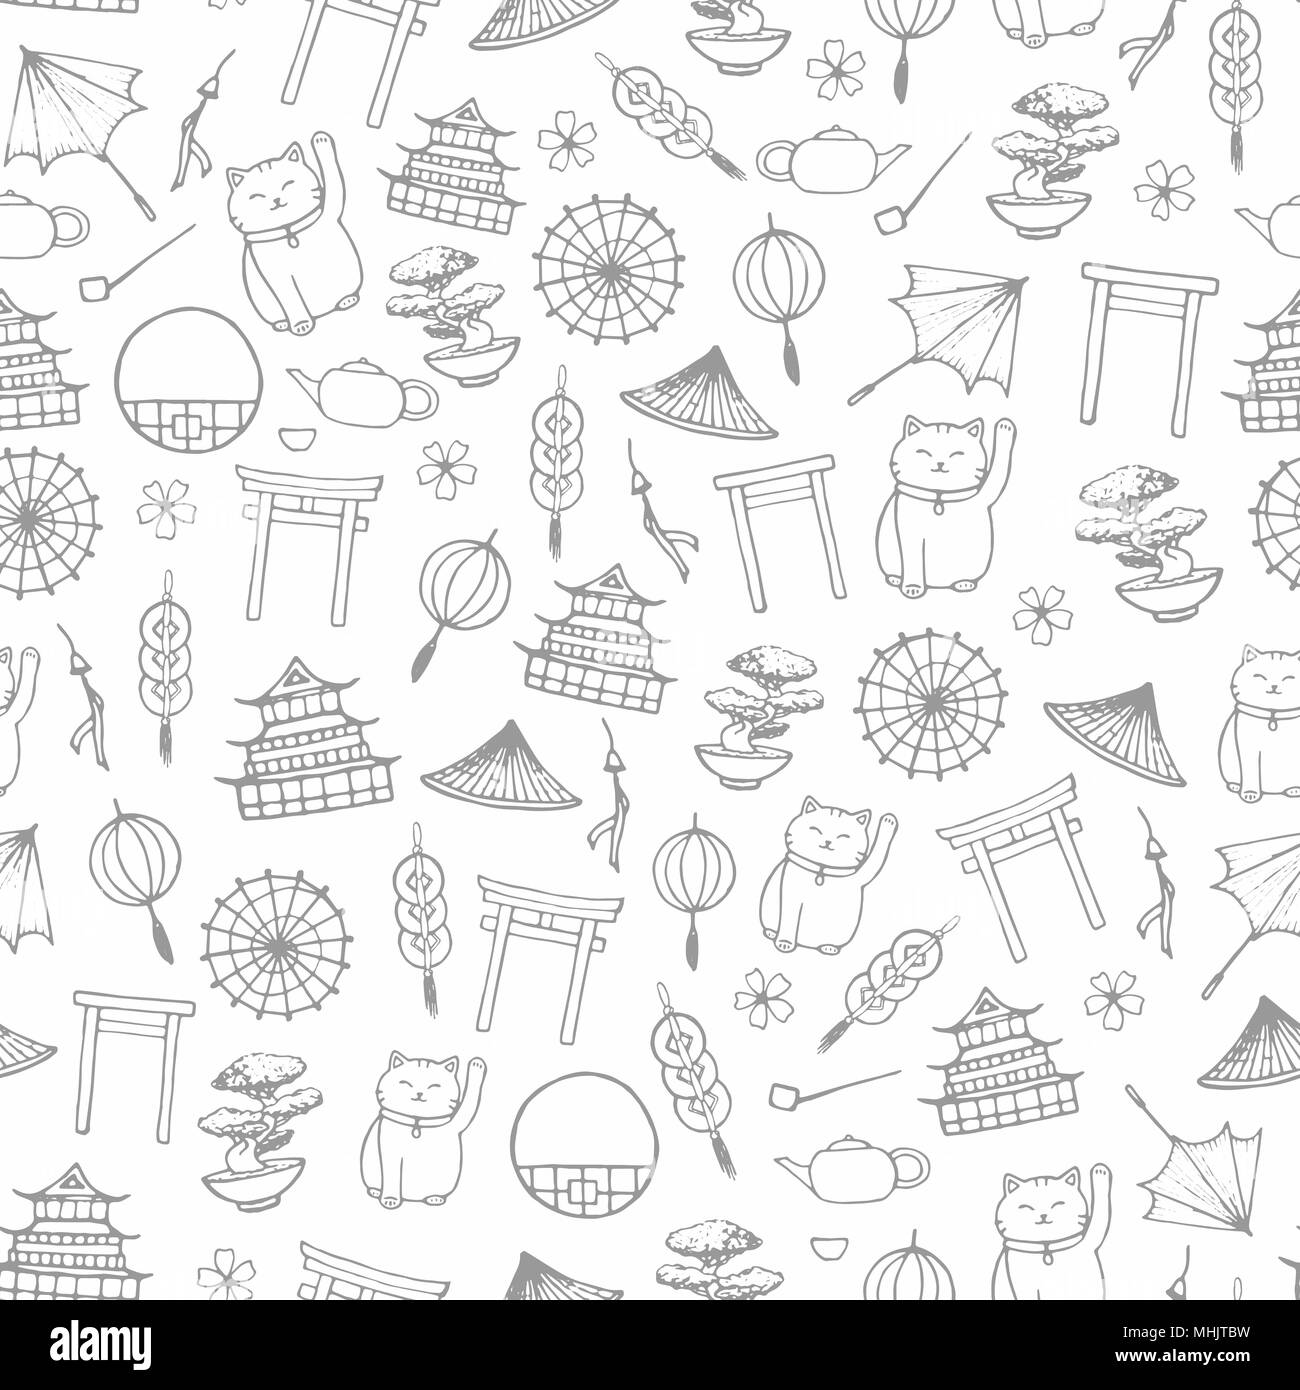 Hand drawn vector asian seamless pattern with umbrellas, japanese lucky cats, coins, lanterns, bonsai and  torii gates contours in sketchy style on th Stock Vector